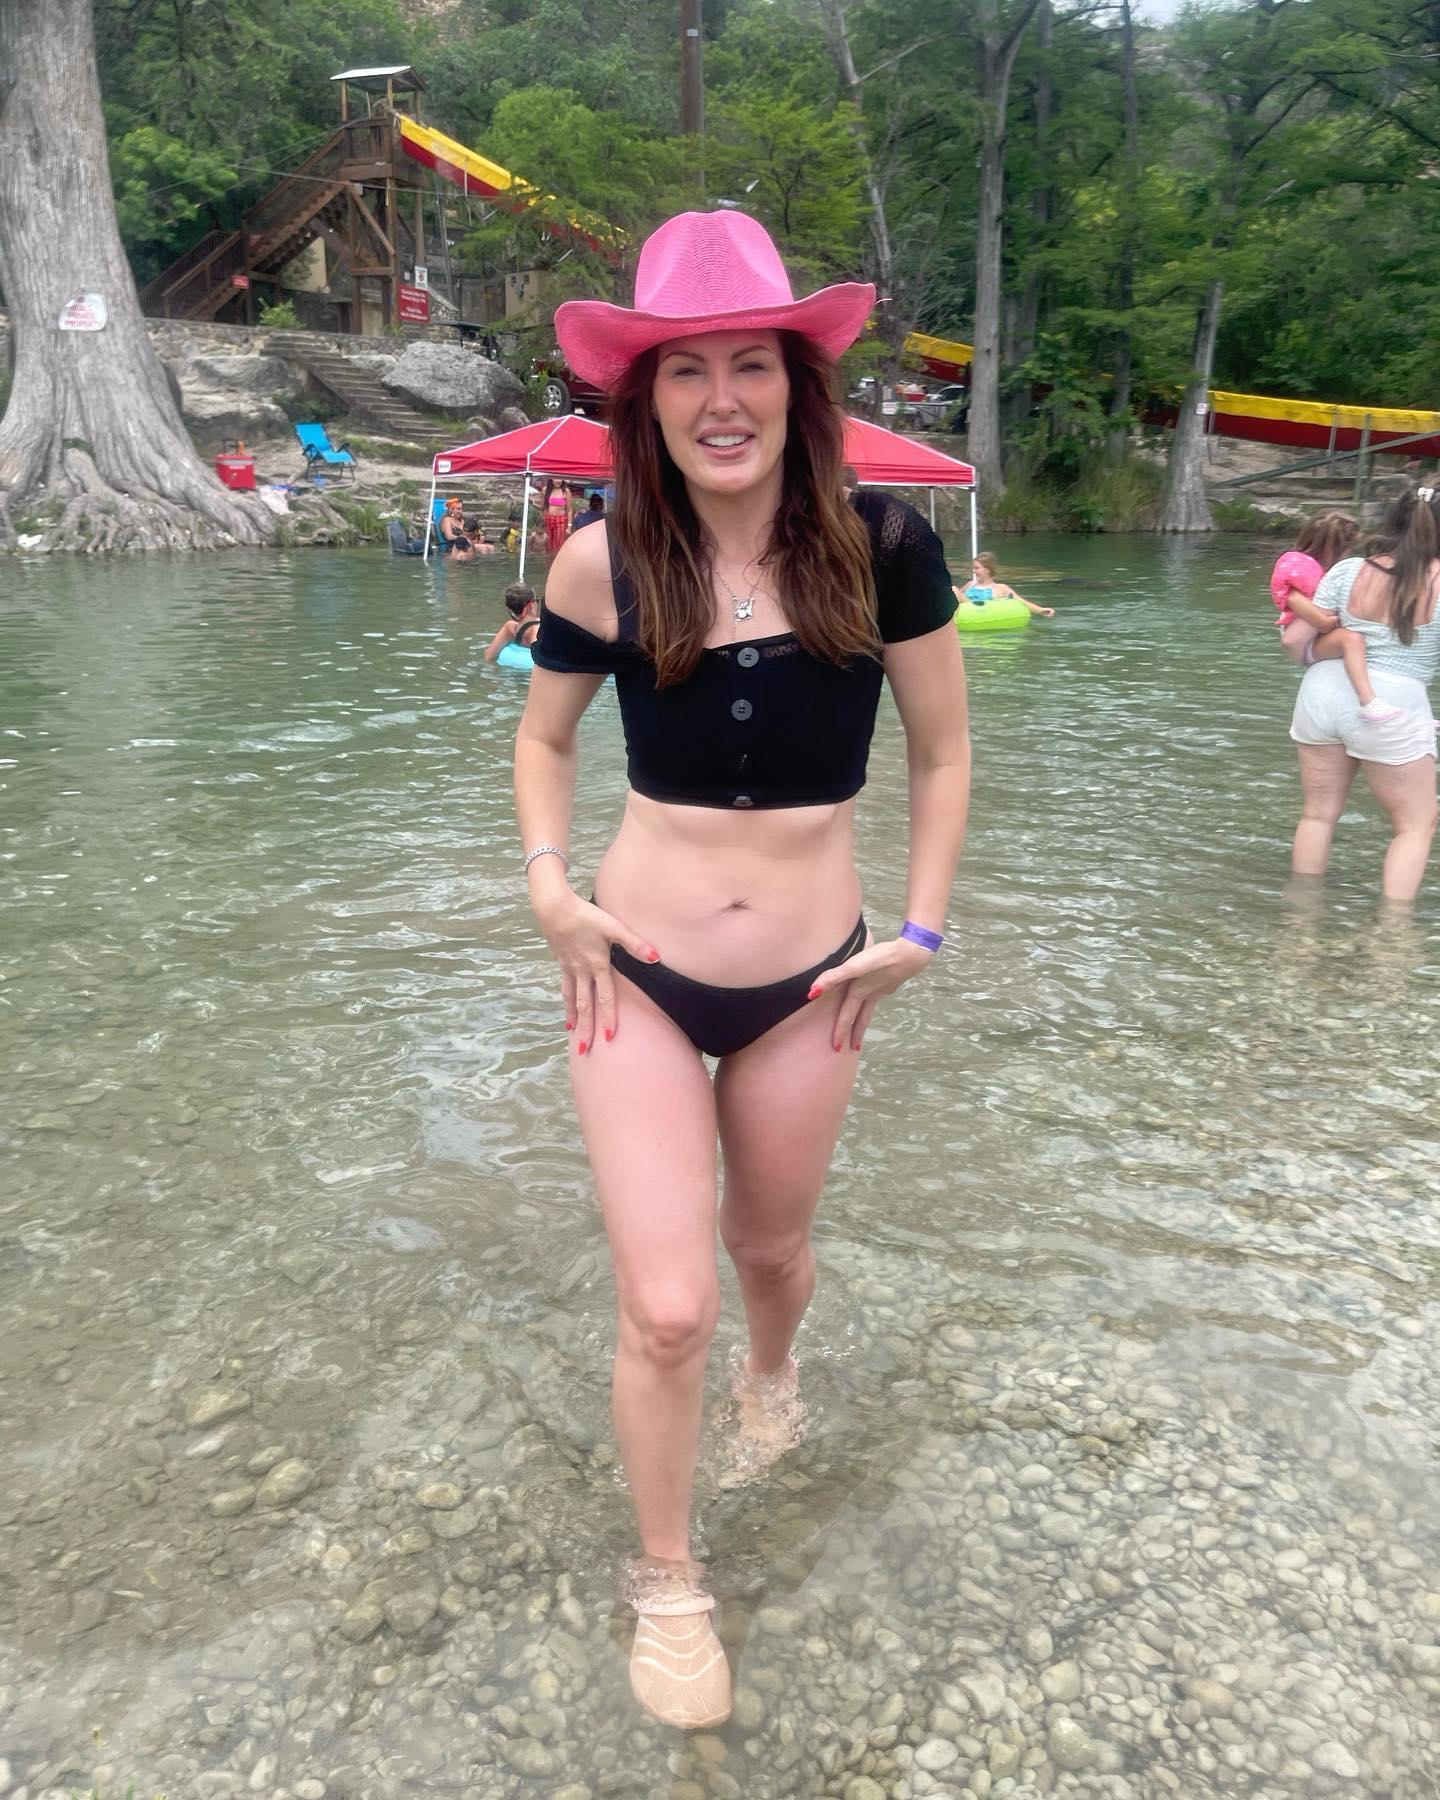 Addison Rae's Mom Sheri Easterling Poses In A Black Bikini and Pink Cowboy Hat! 